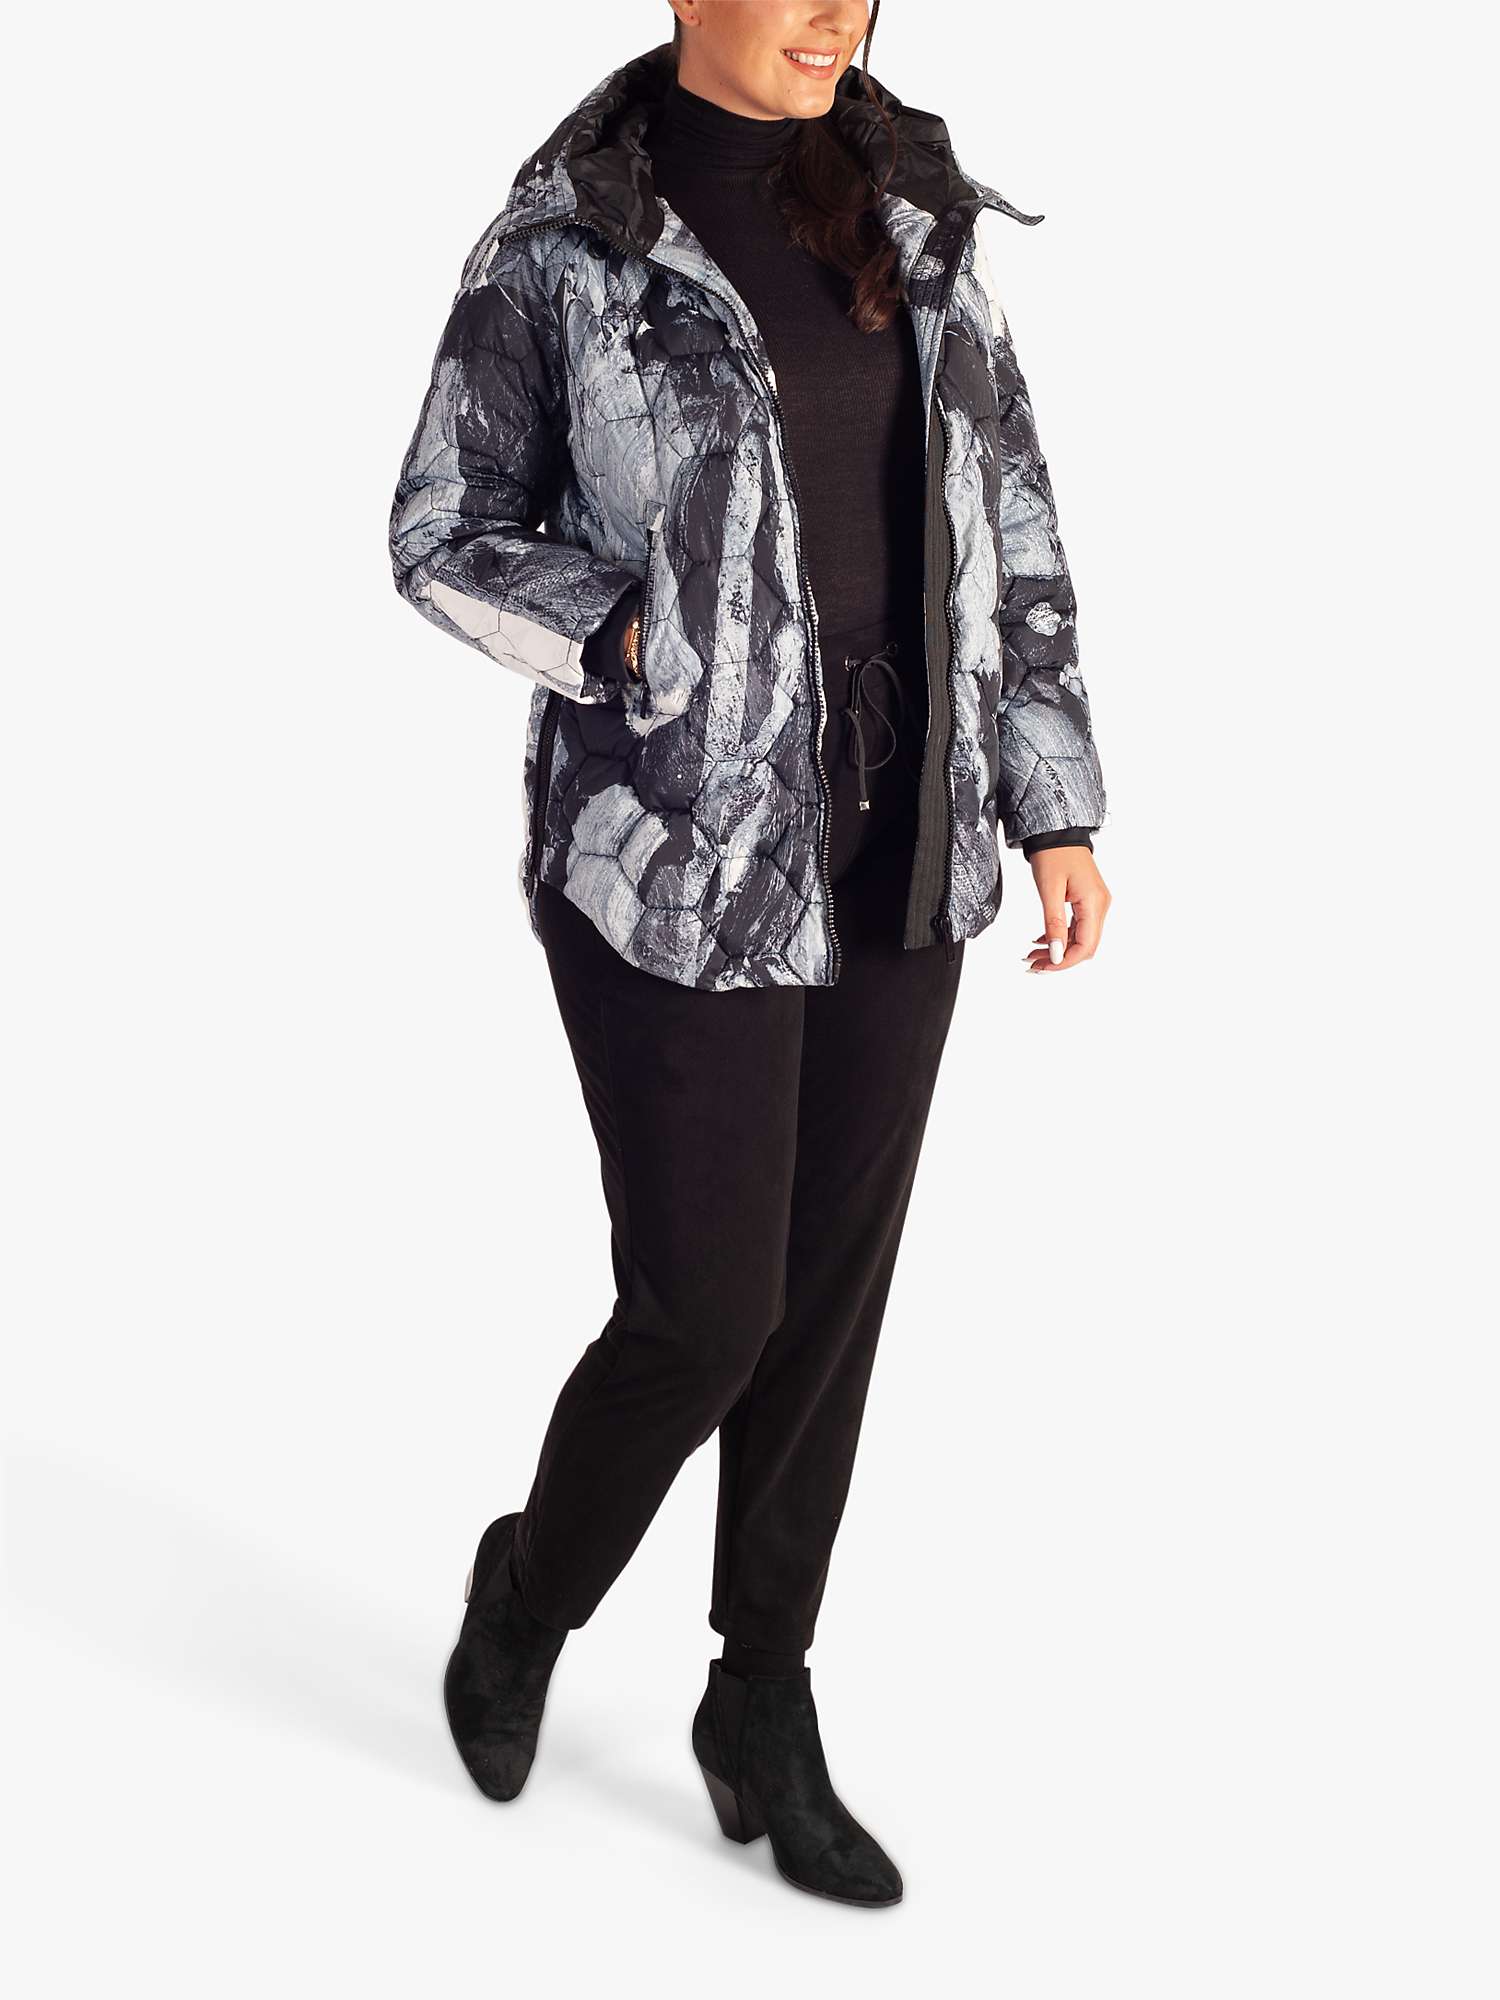 Buy chesca Abstract Print Quilted Jacket, Black/White Online at johnlewis.com